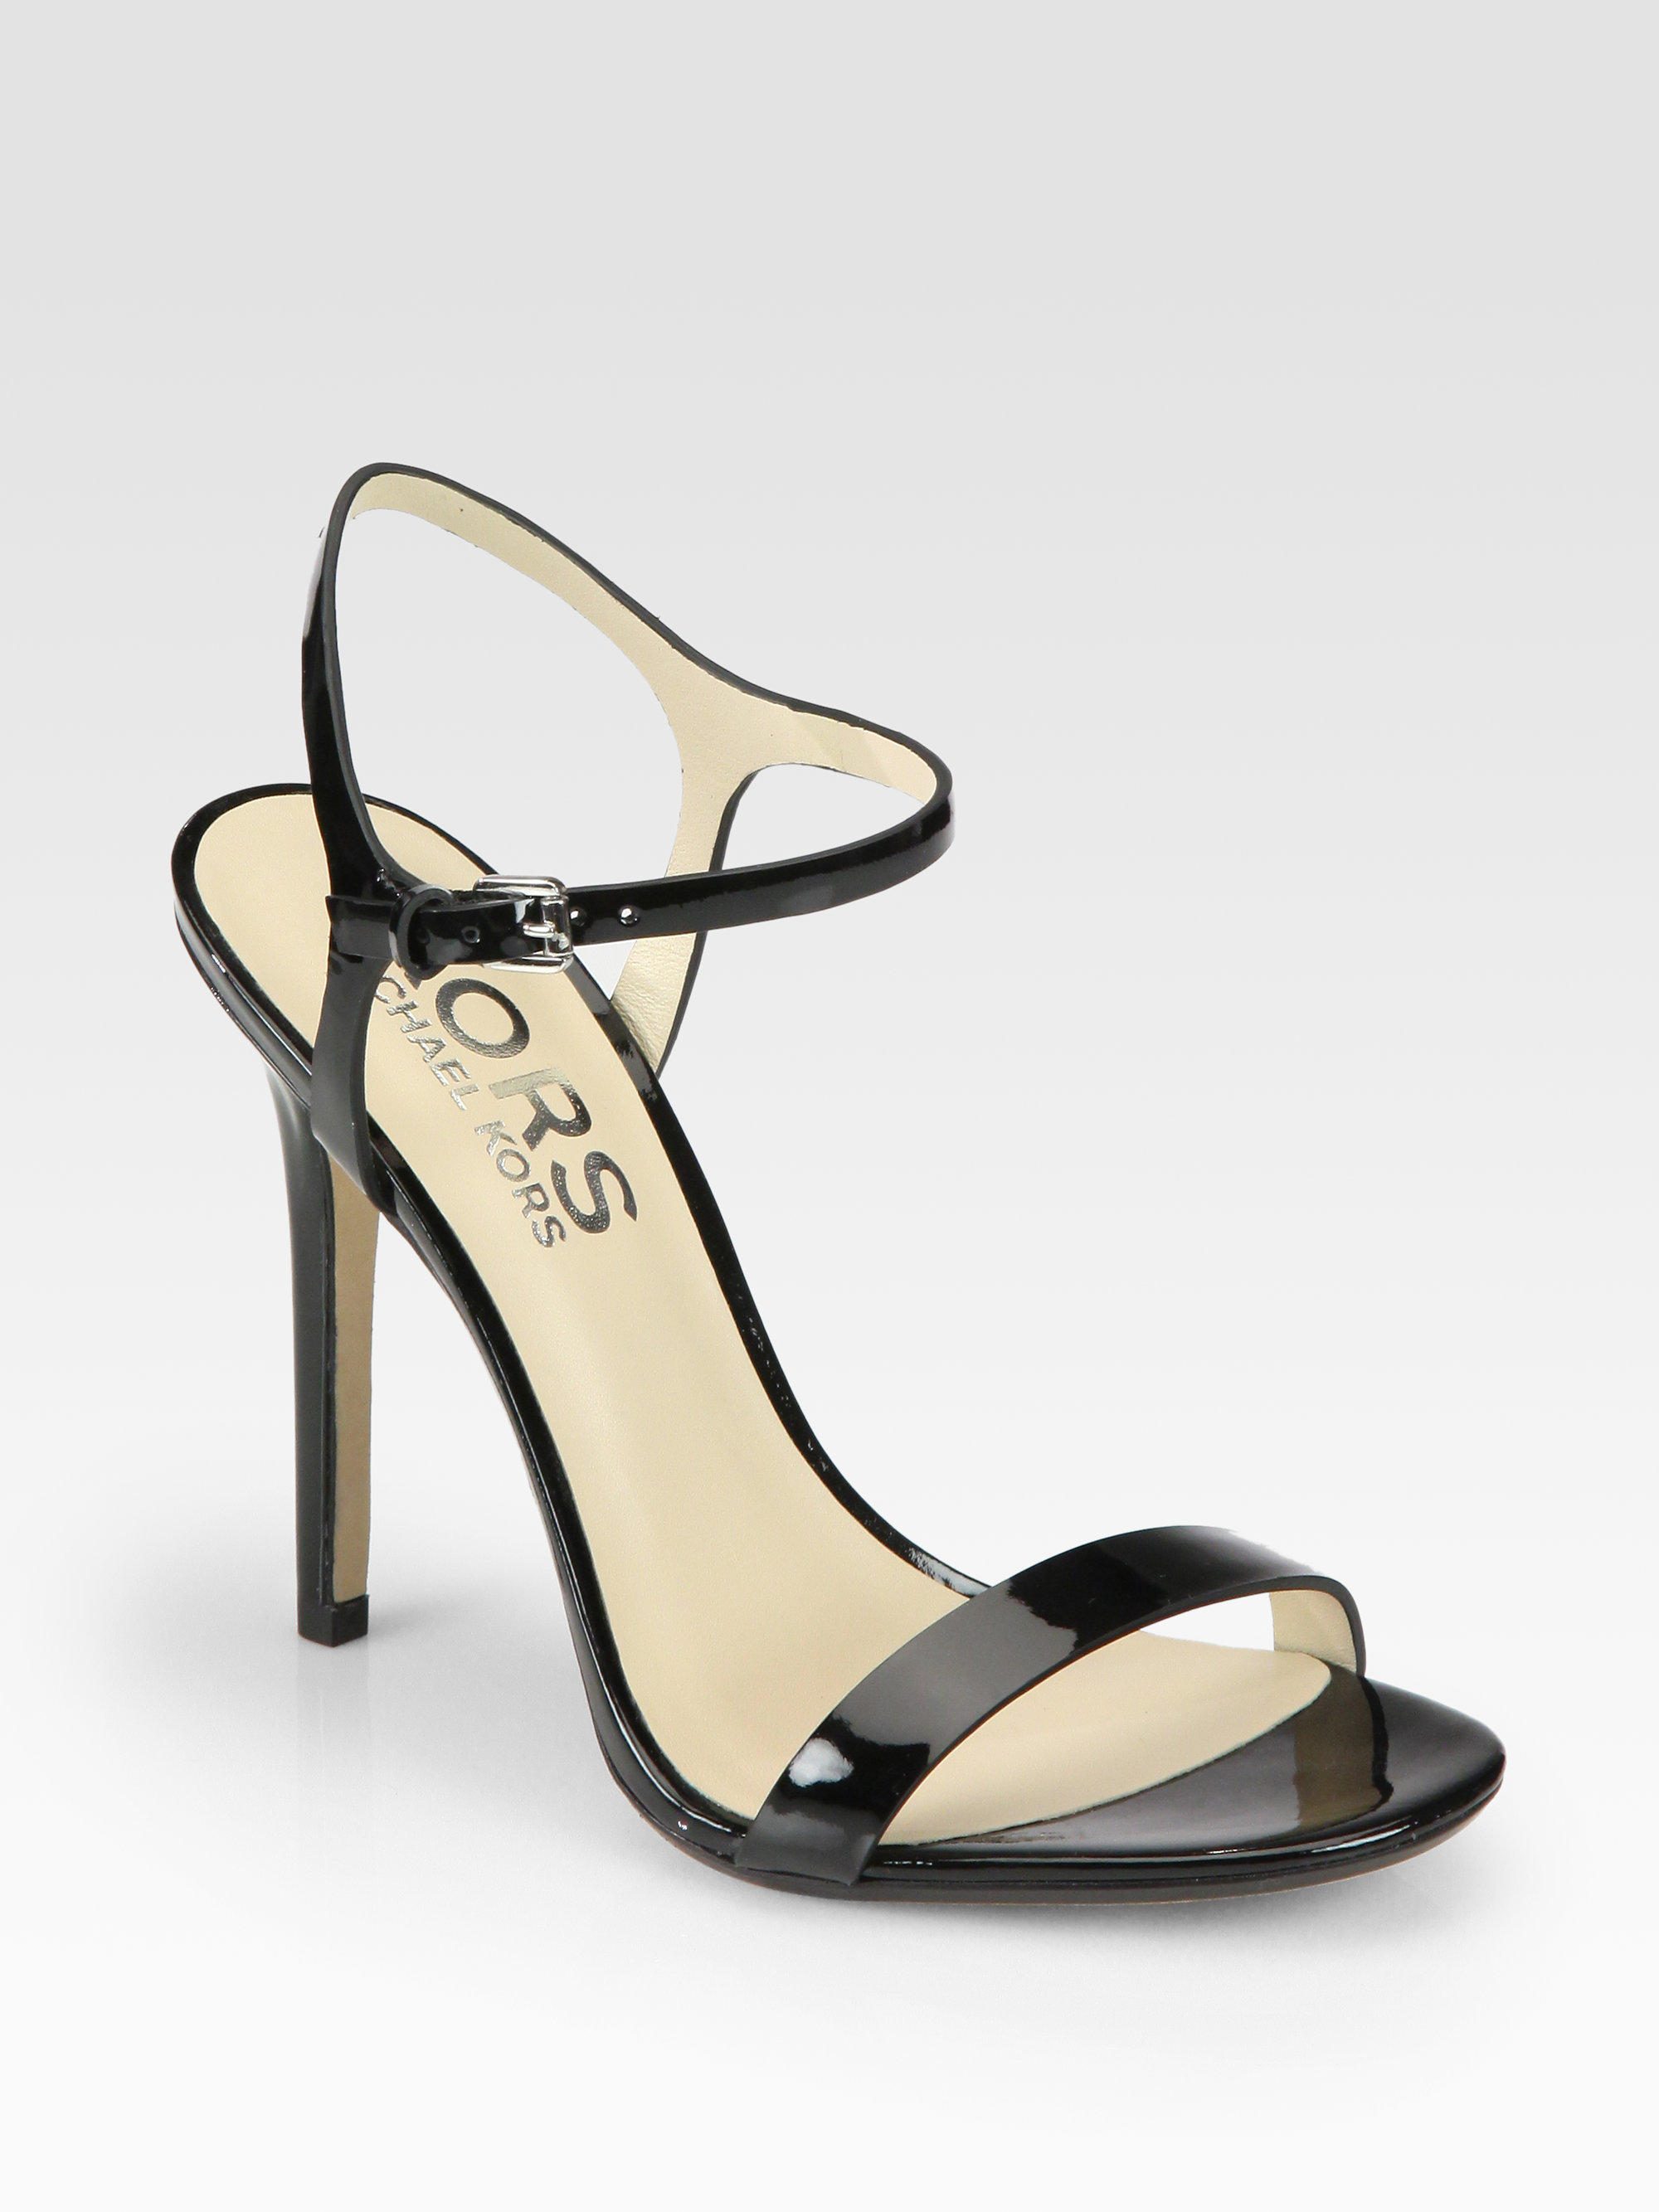 Kors By Michael Kors Mikaela Patent Leather Ankle Strap Sandals in ...